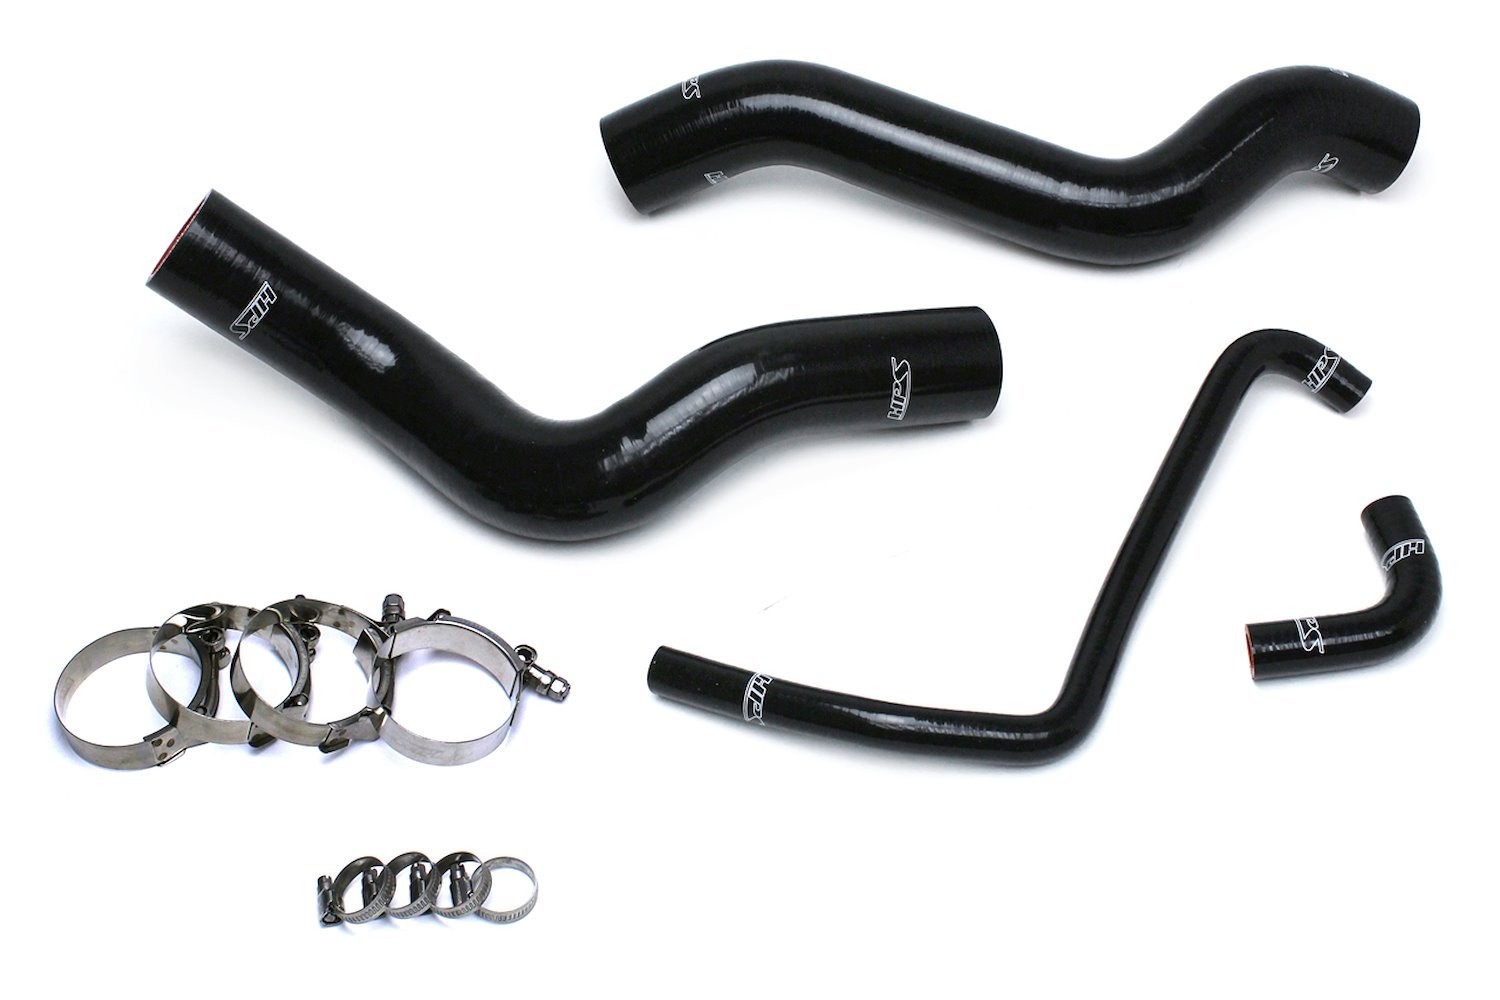 57-1503R-BLK Radiator Hose Kit, High-Temp 3-Ply Reinforced Silicone, Replace OEM Rubber Radiator Coolant Hoses